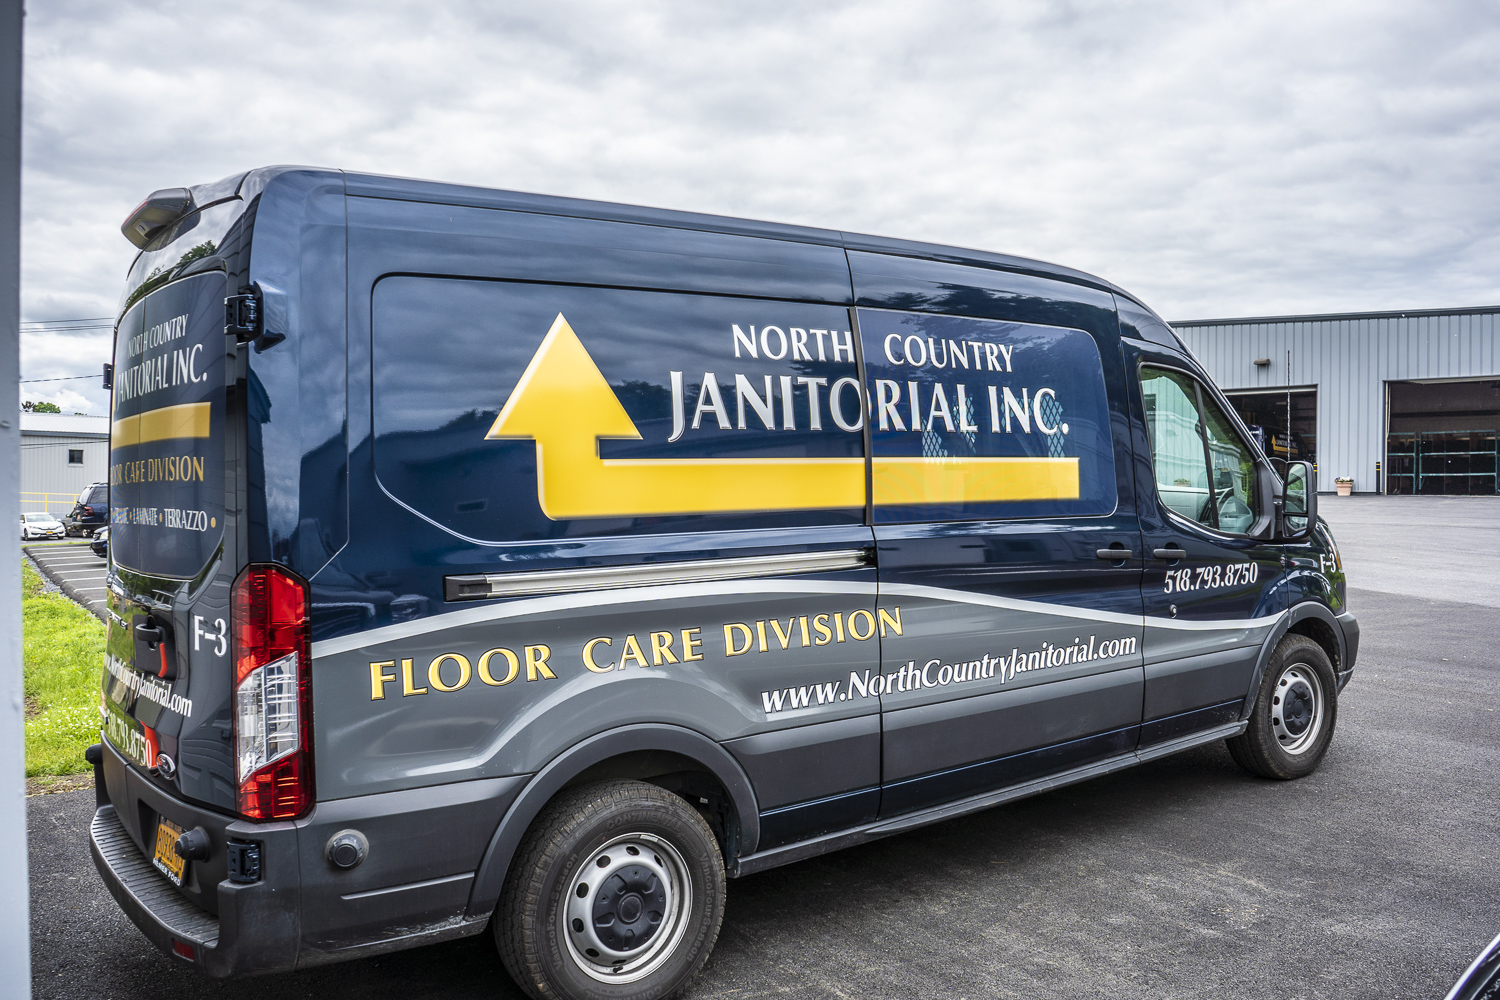 North Country Janitorial Inc.